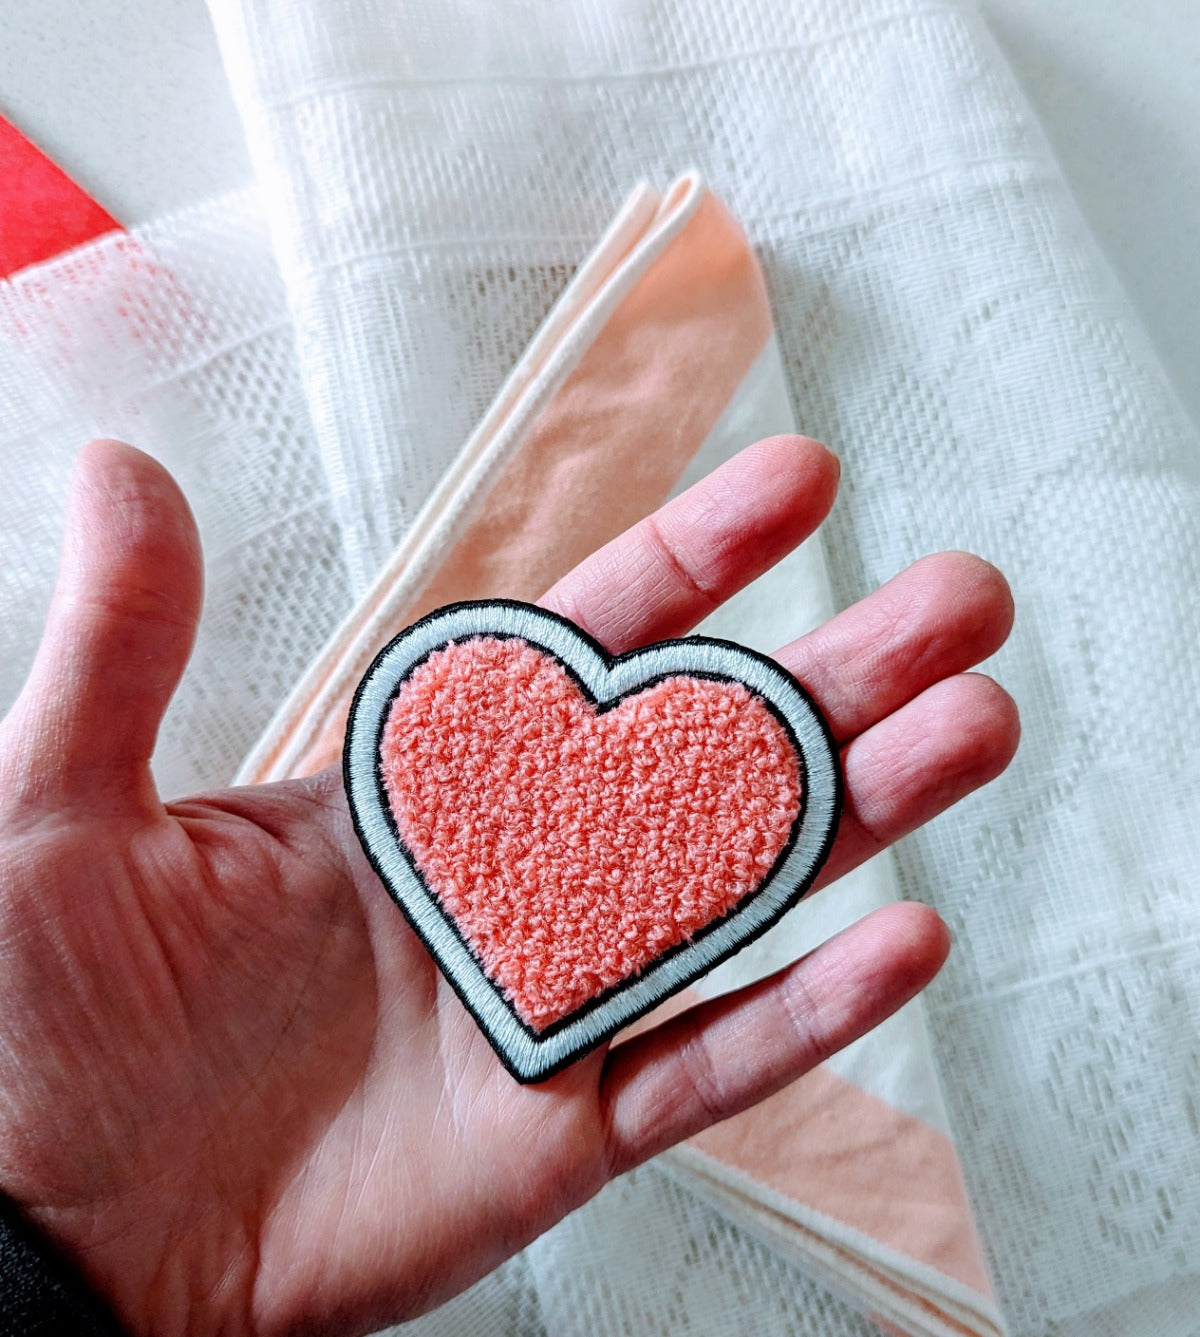 Heart Iron On Patches Love Sew On Appliques Chenille Embroidered Patch Gold  Edge